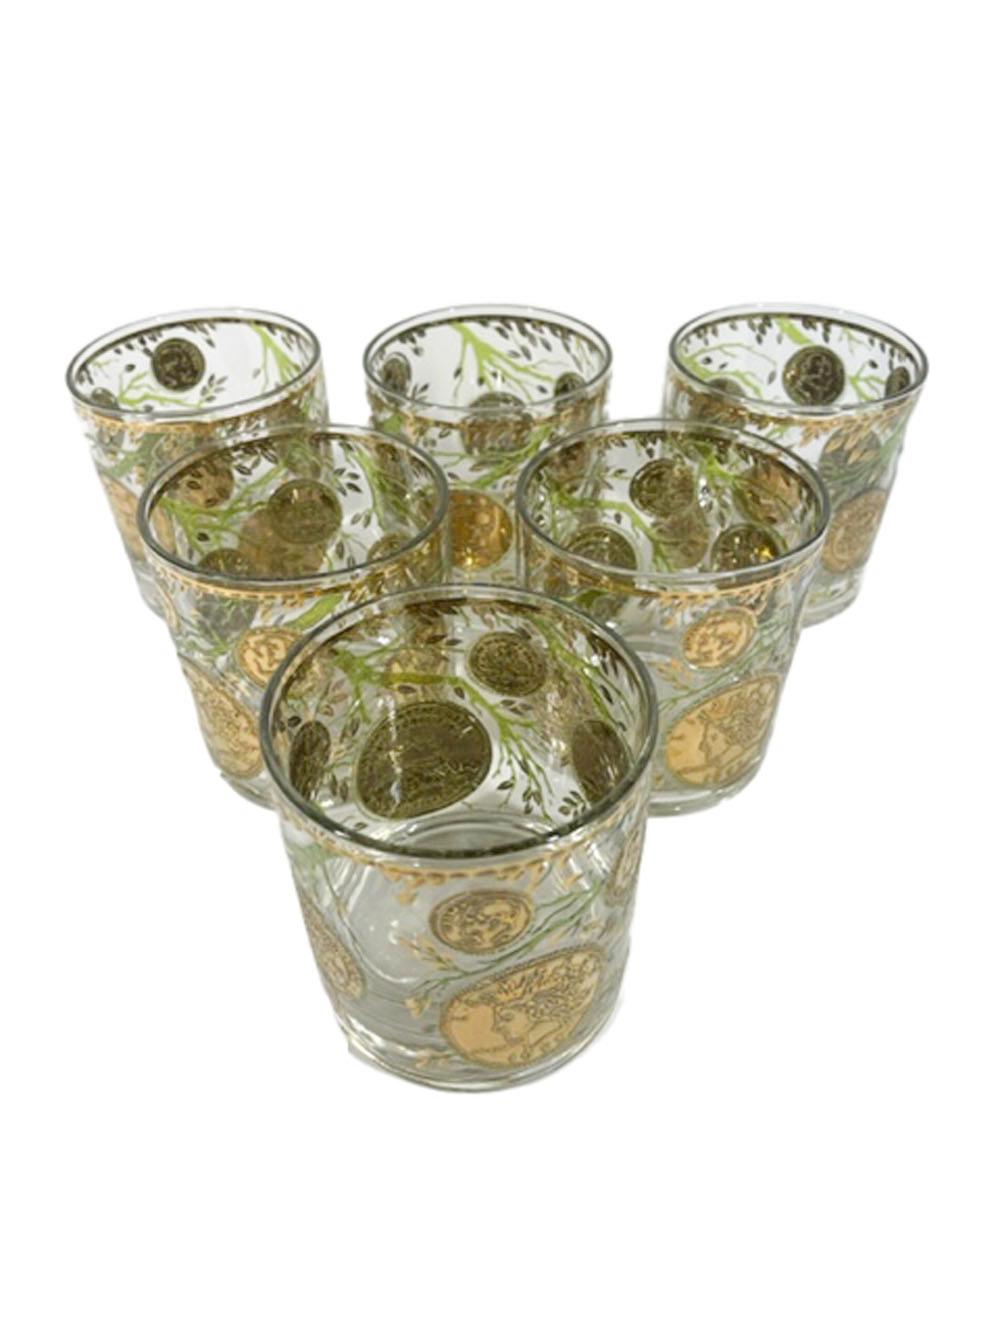 Mid-Century Modern Six Culver LTD Rocks Glasses in the Gold Version of the Midas Pattern For Sale